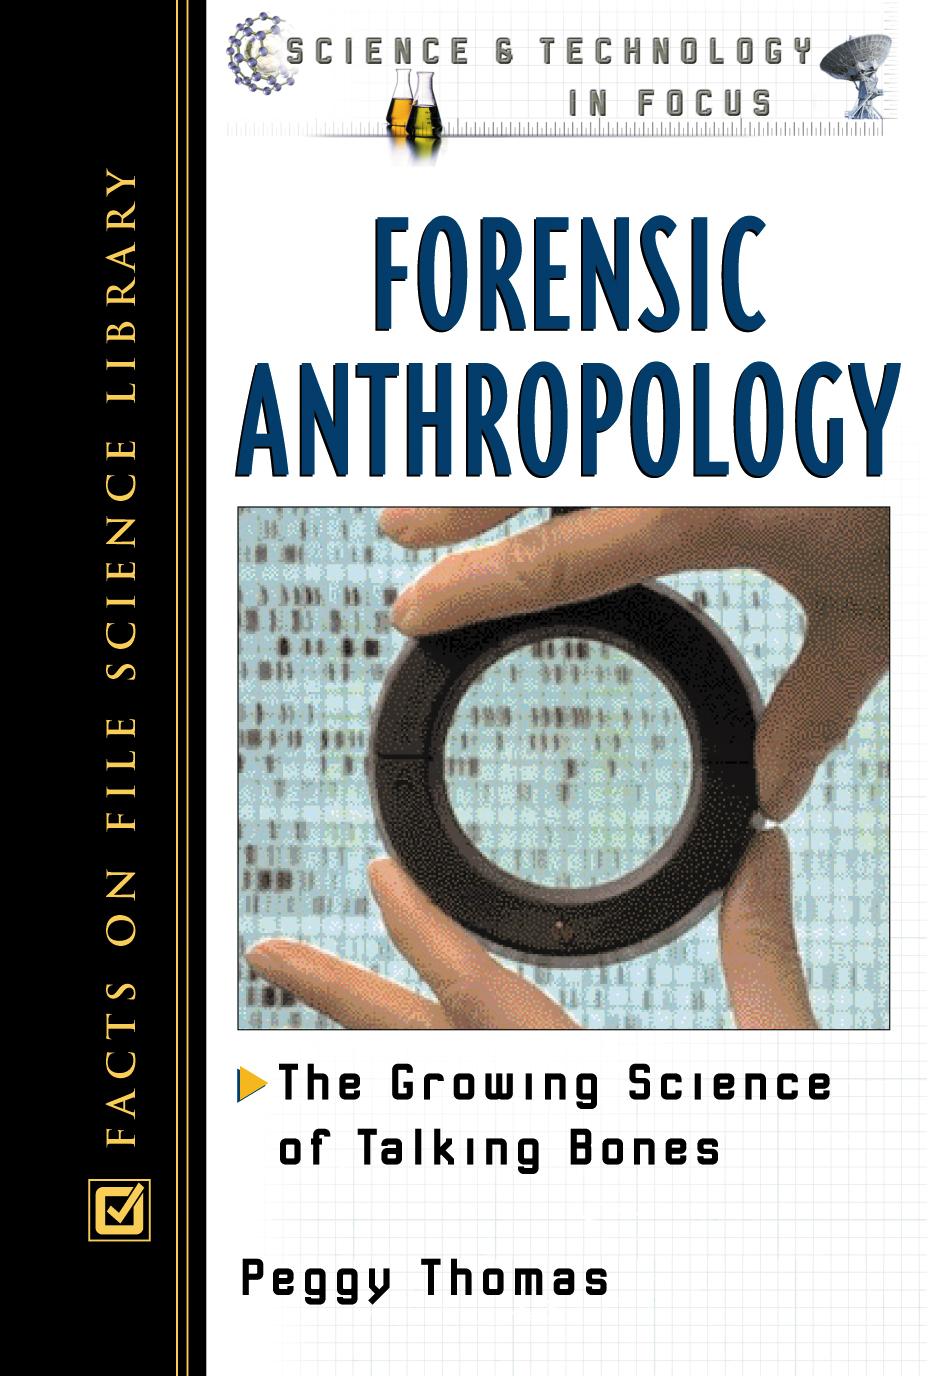 flesh and bone an introduction to forensic anthropology pdf